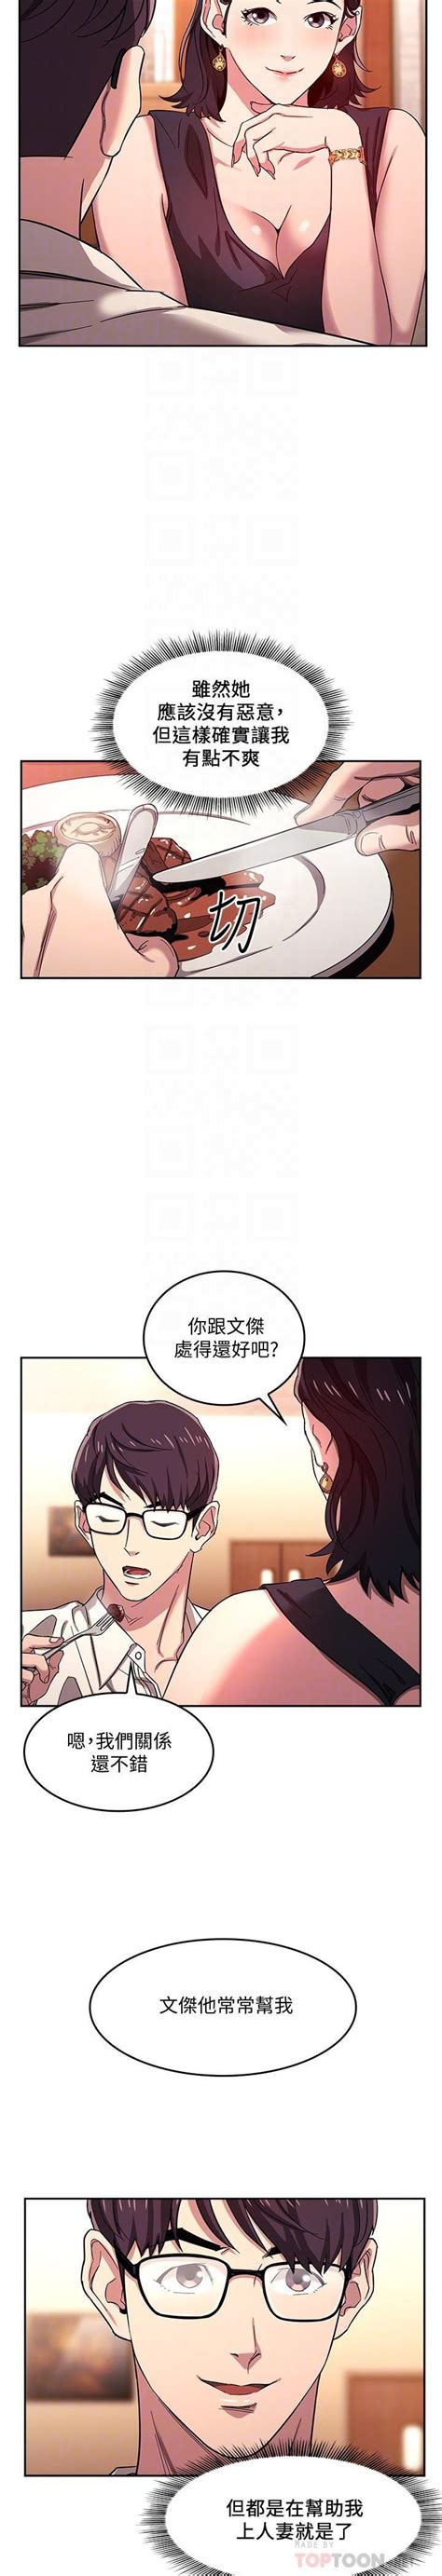 Mother hunting friend's mom, 친구. Read Mother Hunting Raw Online Free Chapters - Webtoonscan.com